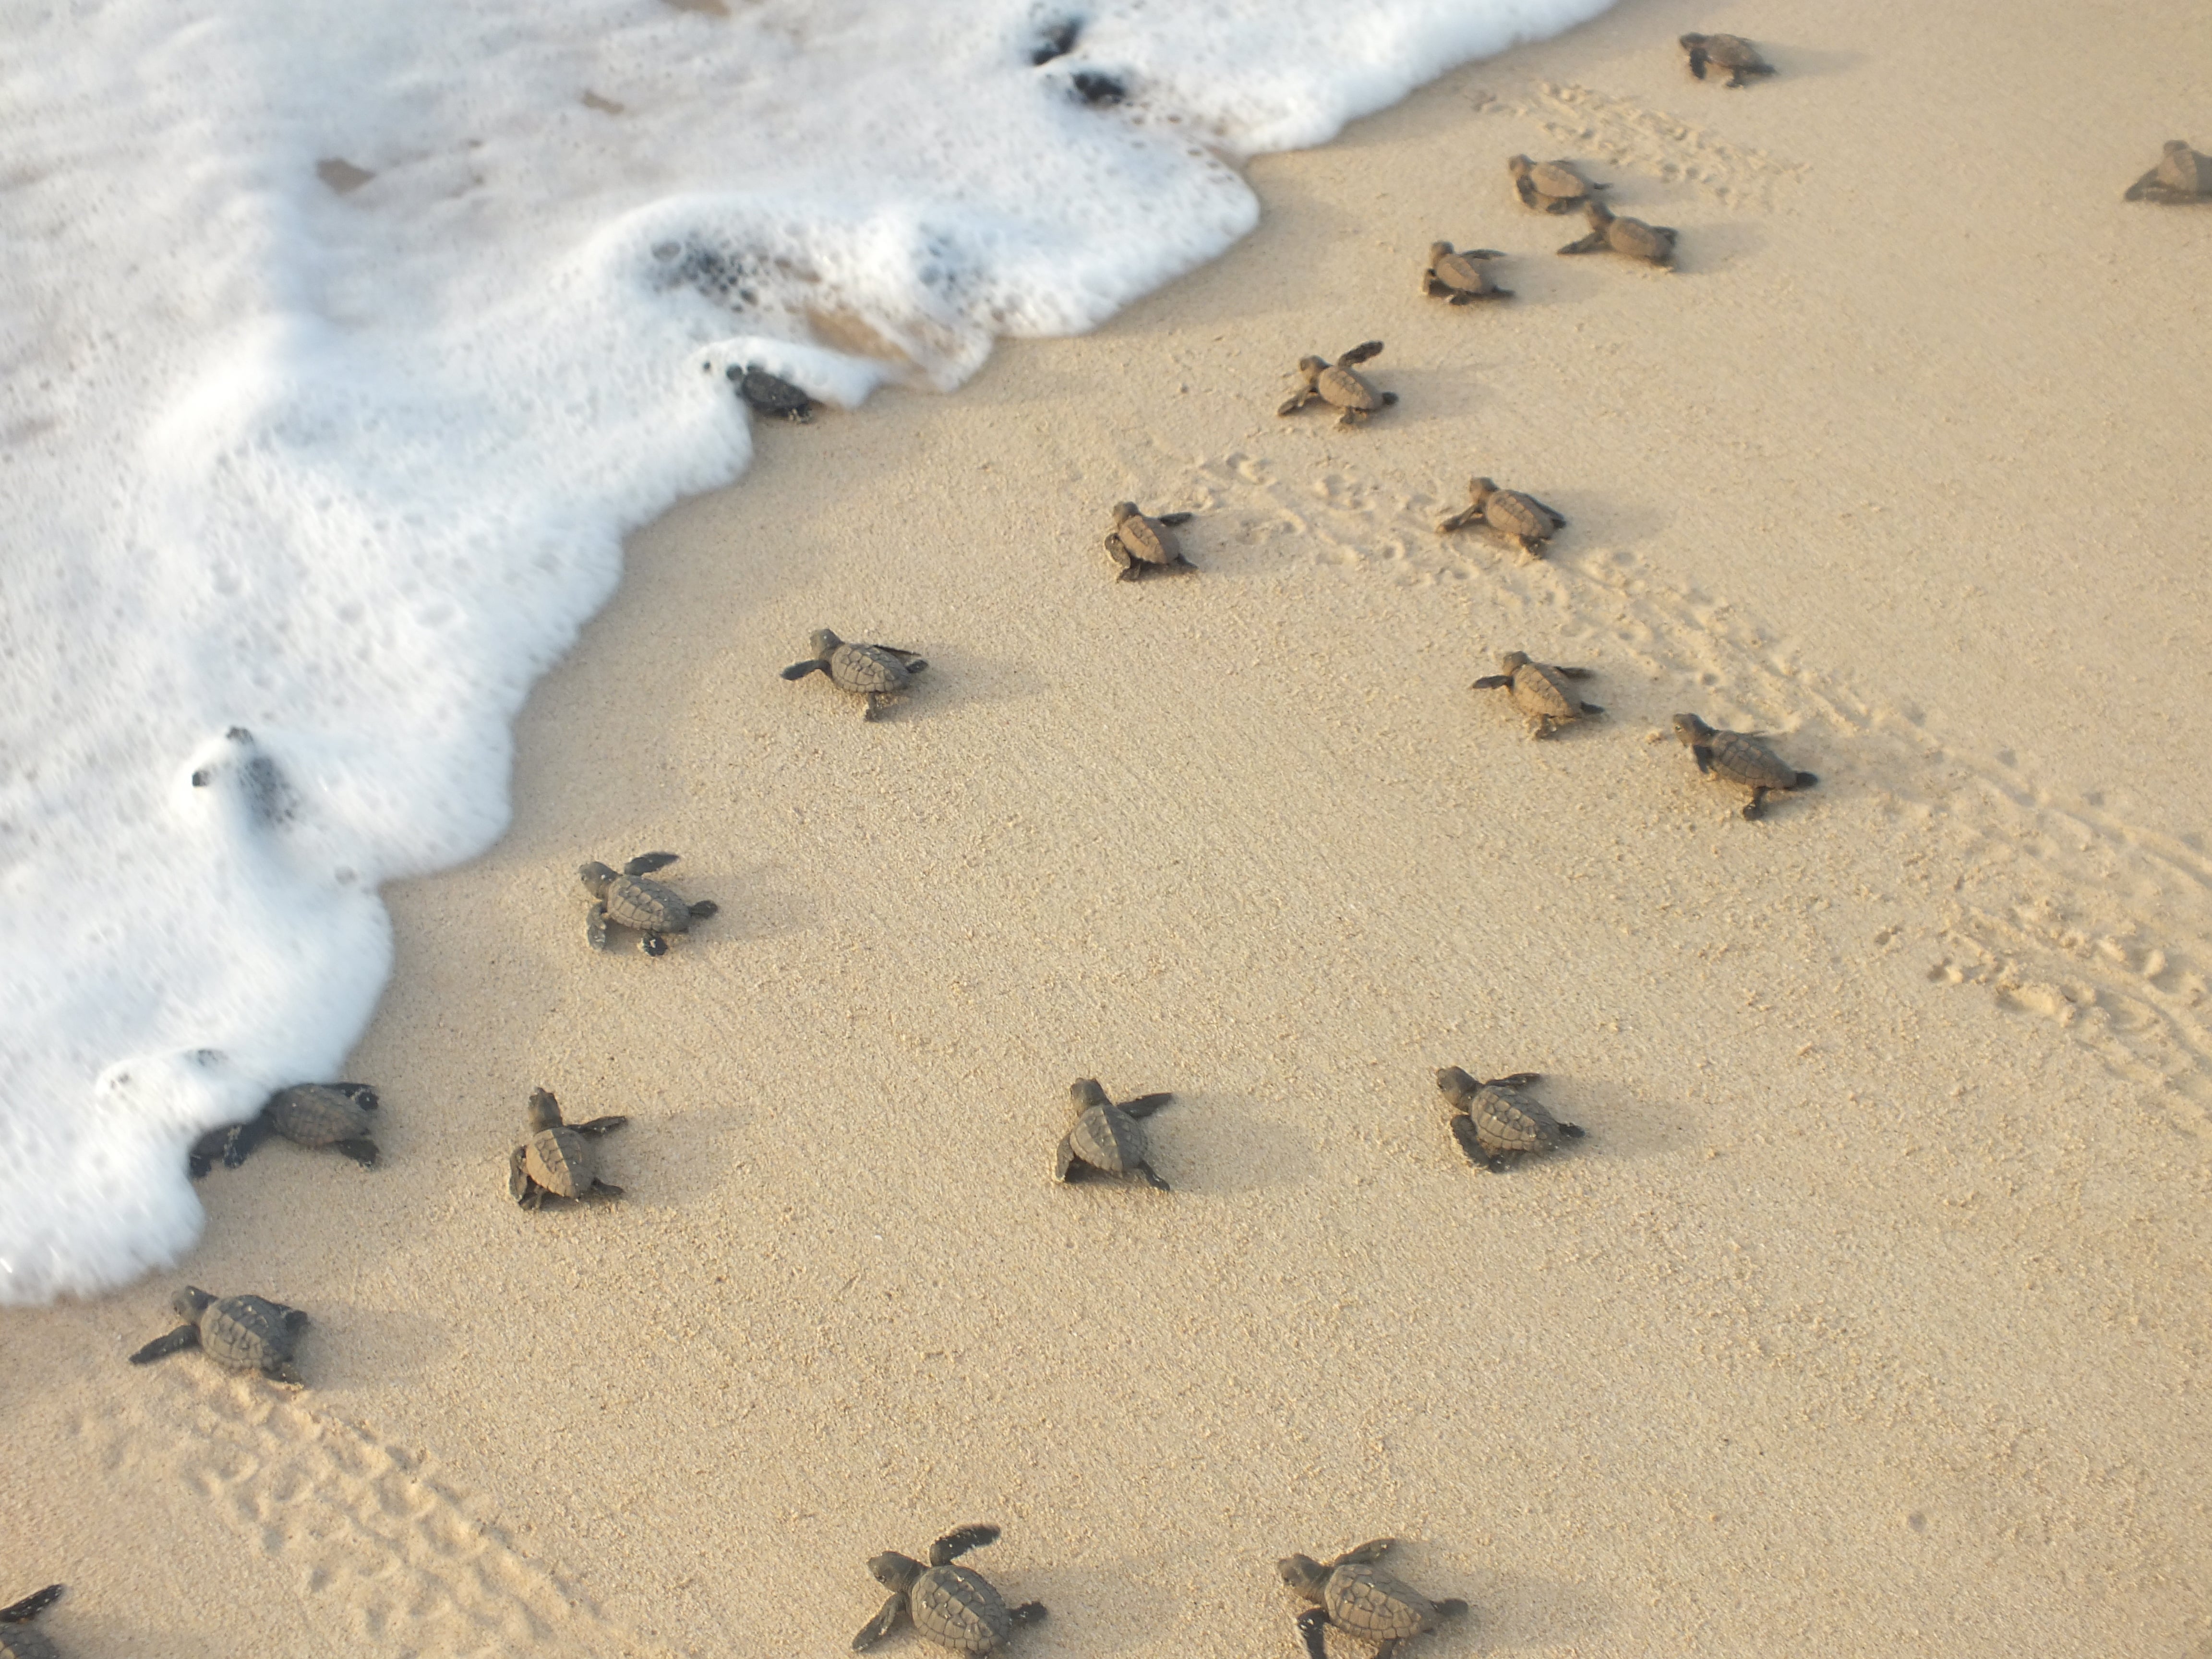 Global heating could harm the survival of loggerhead sea turtle hatchlings